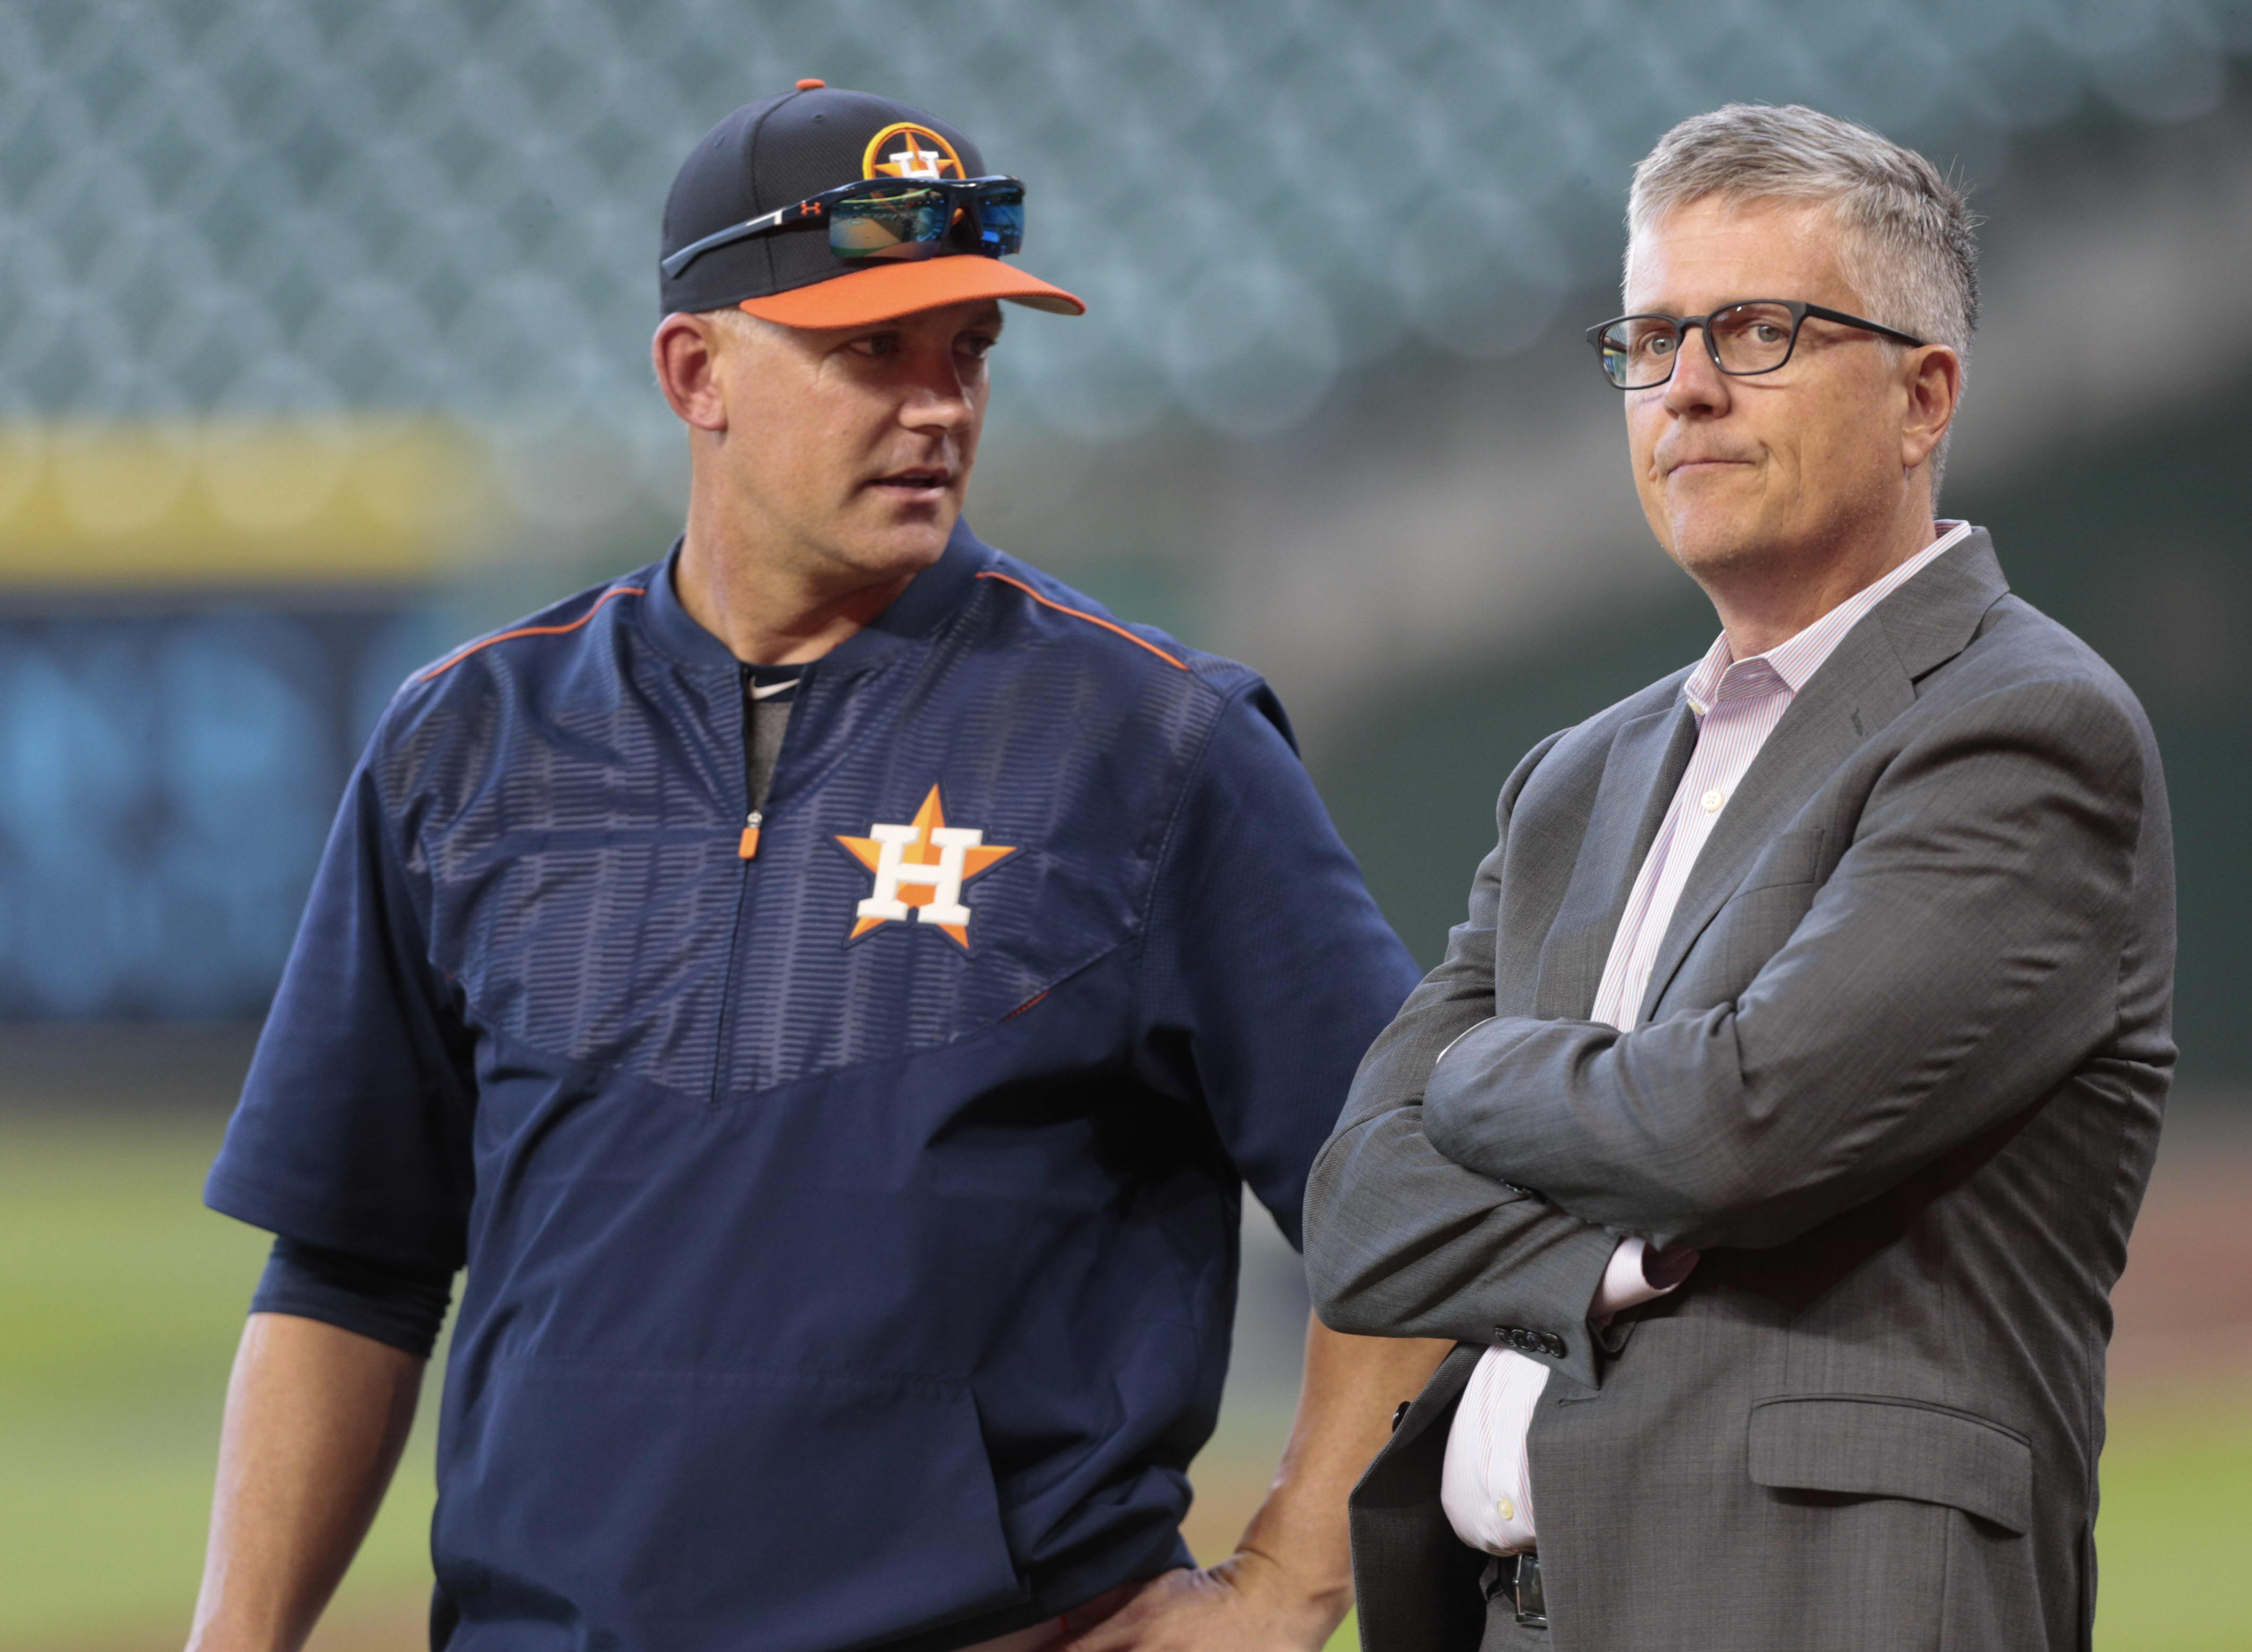 Houston Astros fire GM Luhnow and Hinch over cheating scheme